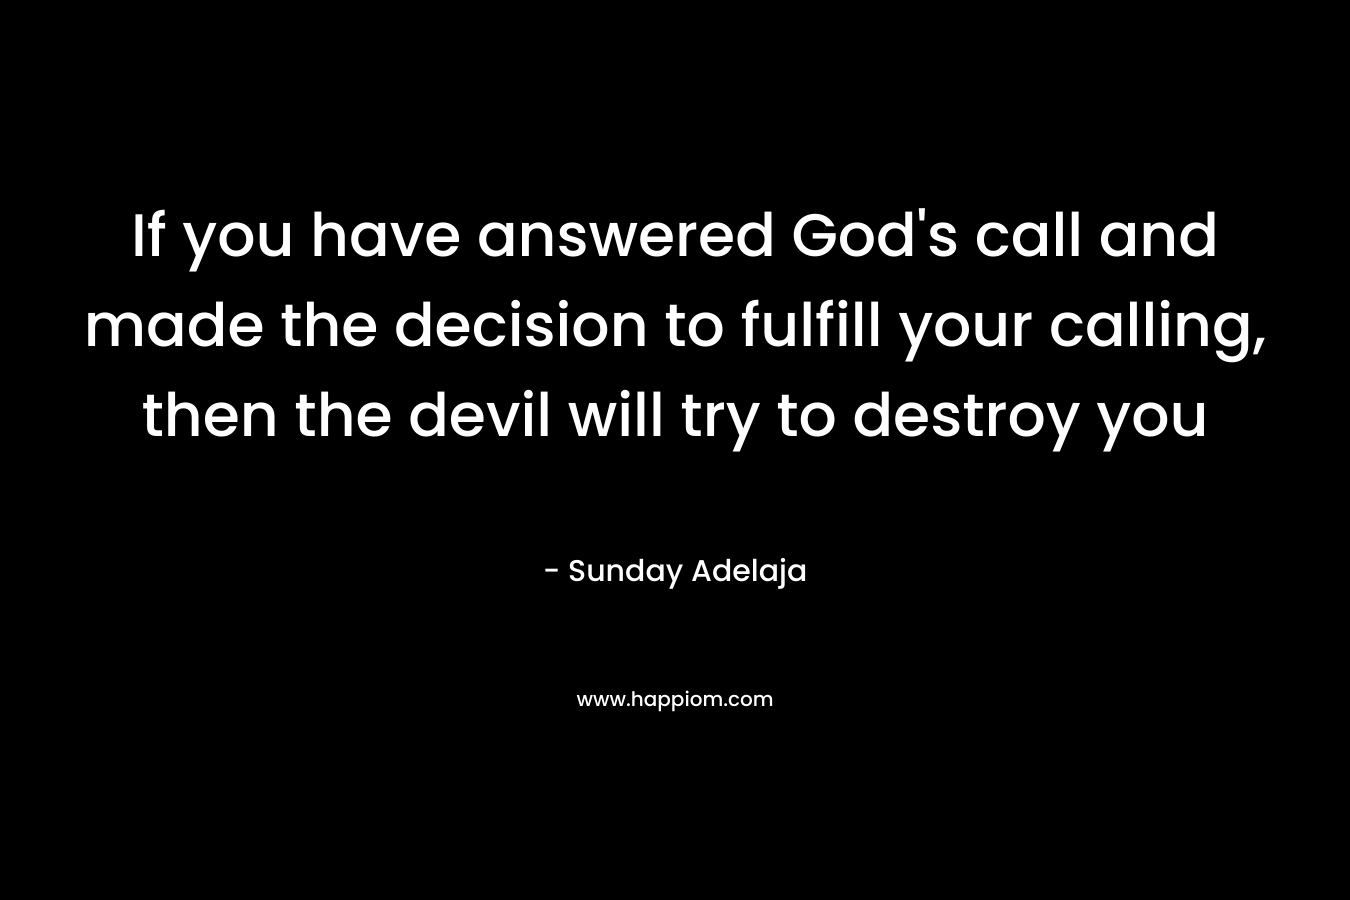 If you have answered God's call and made the decision to fulfill your calling, then the devil will try to destroy you